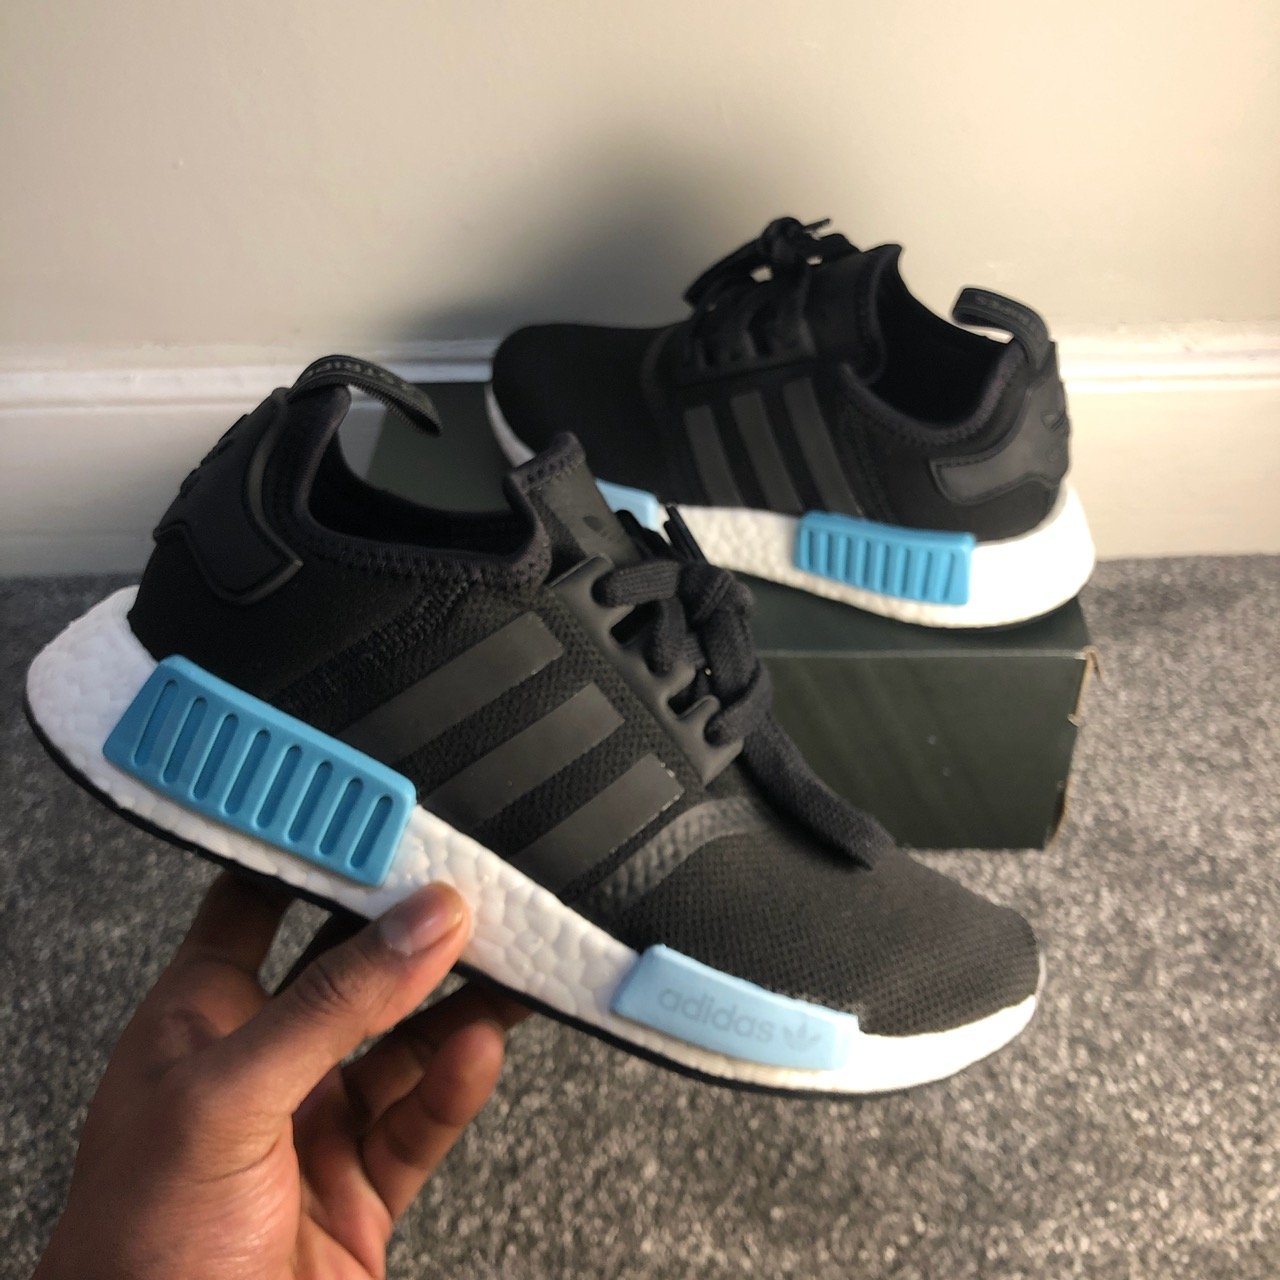 Adidas NMD R1 Ice Blue | famprice.co.uk